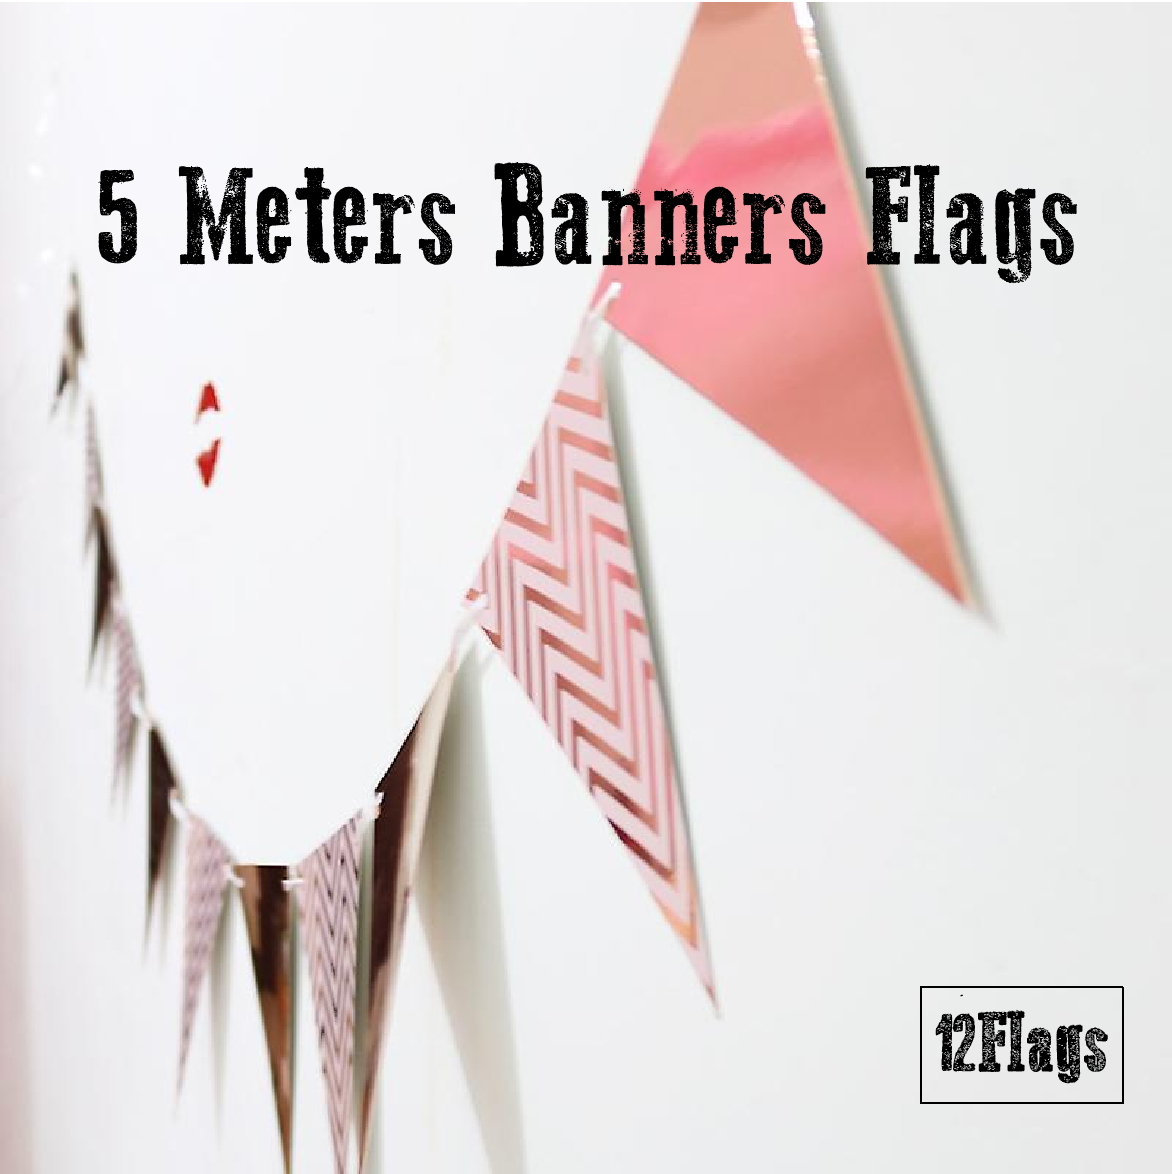 Party Decoration Banner - Pennant Style - Pink